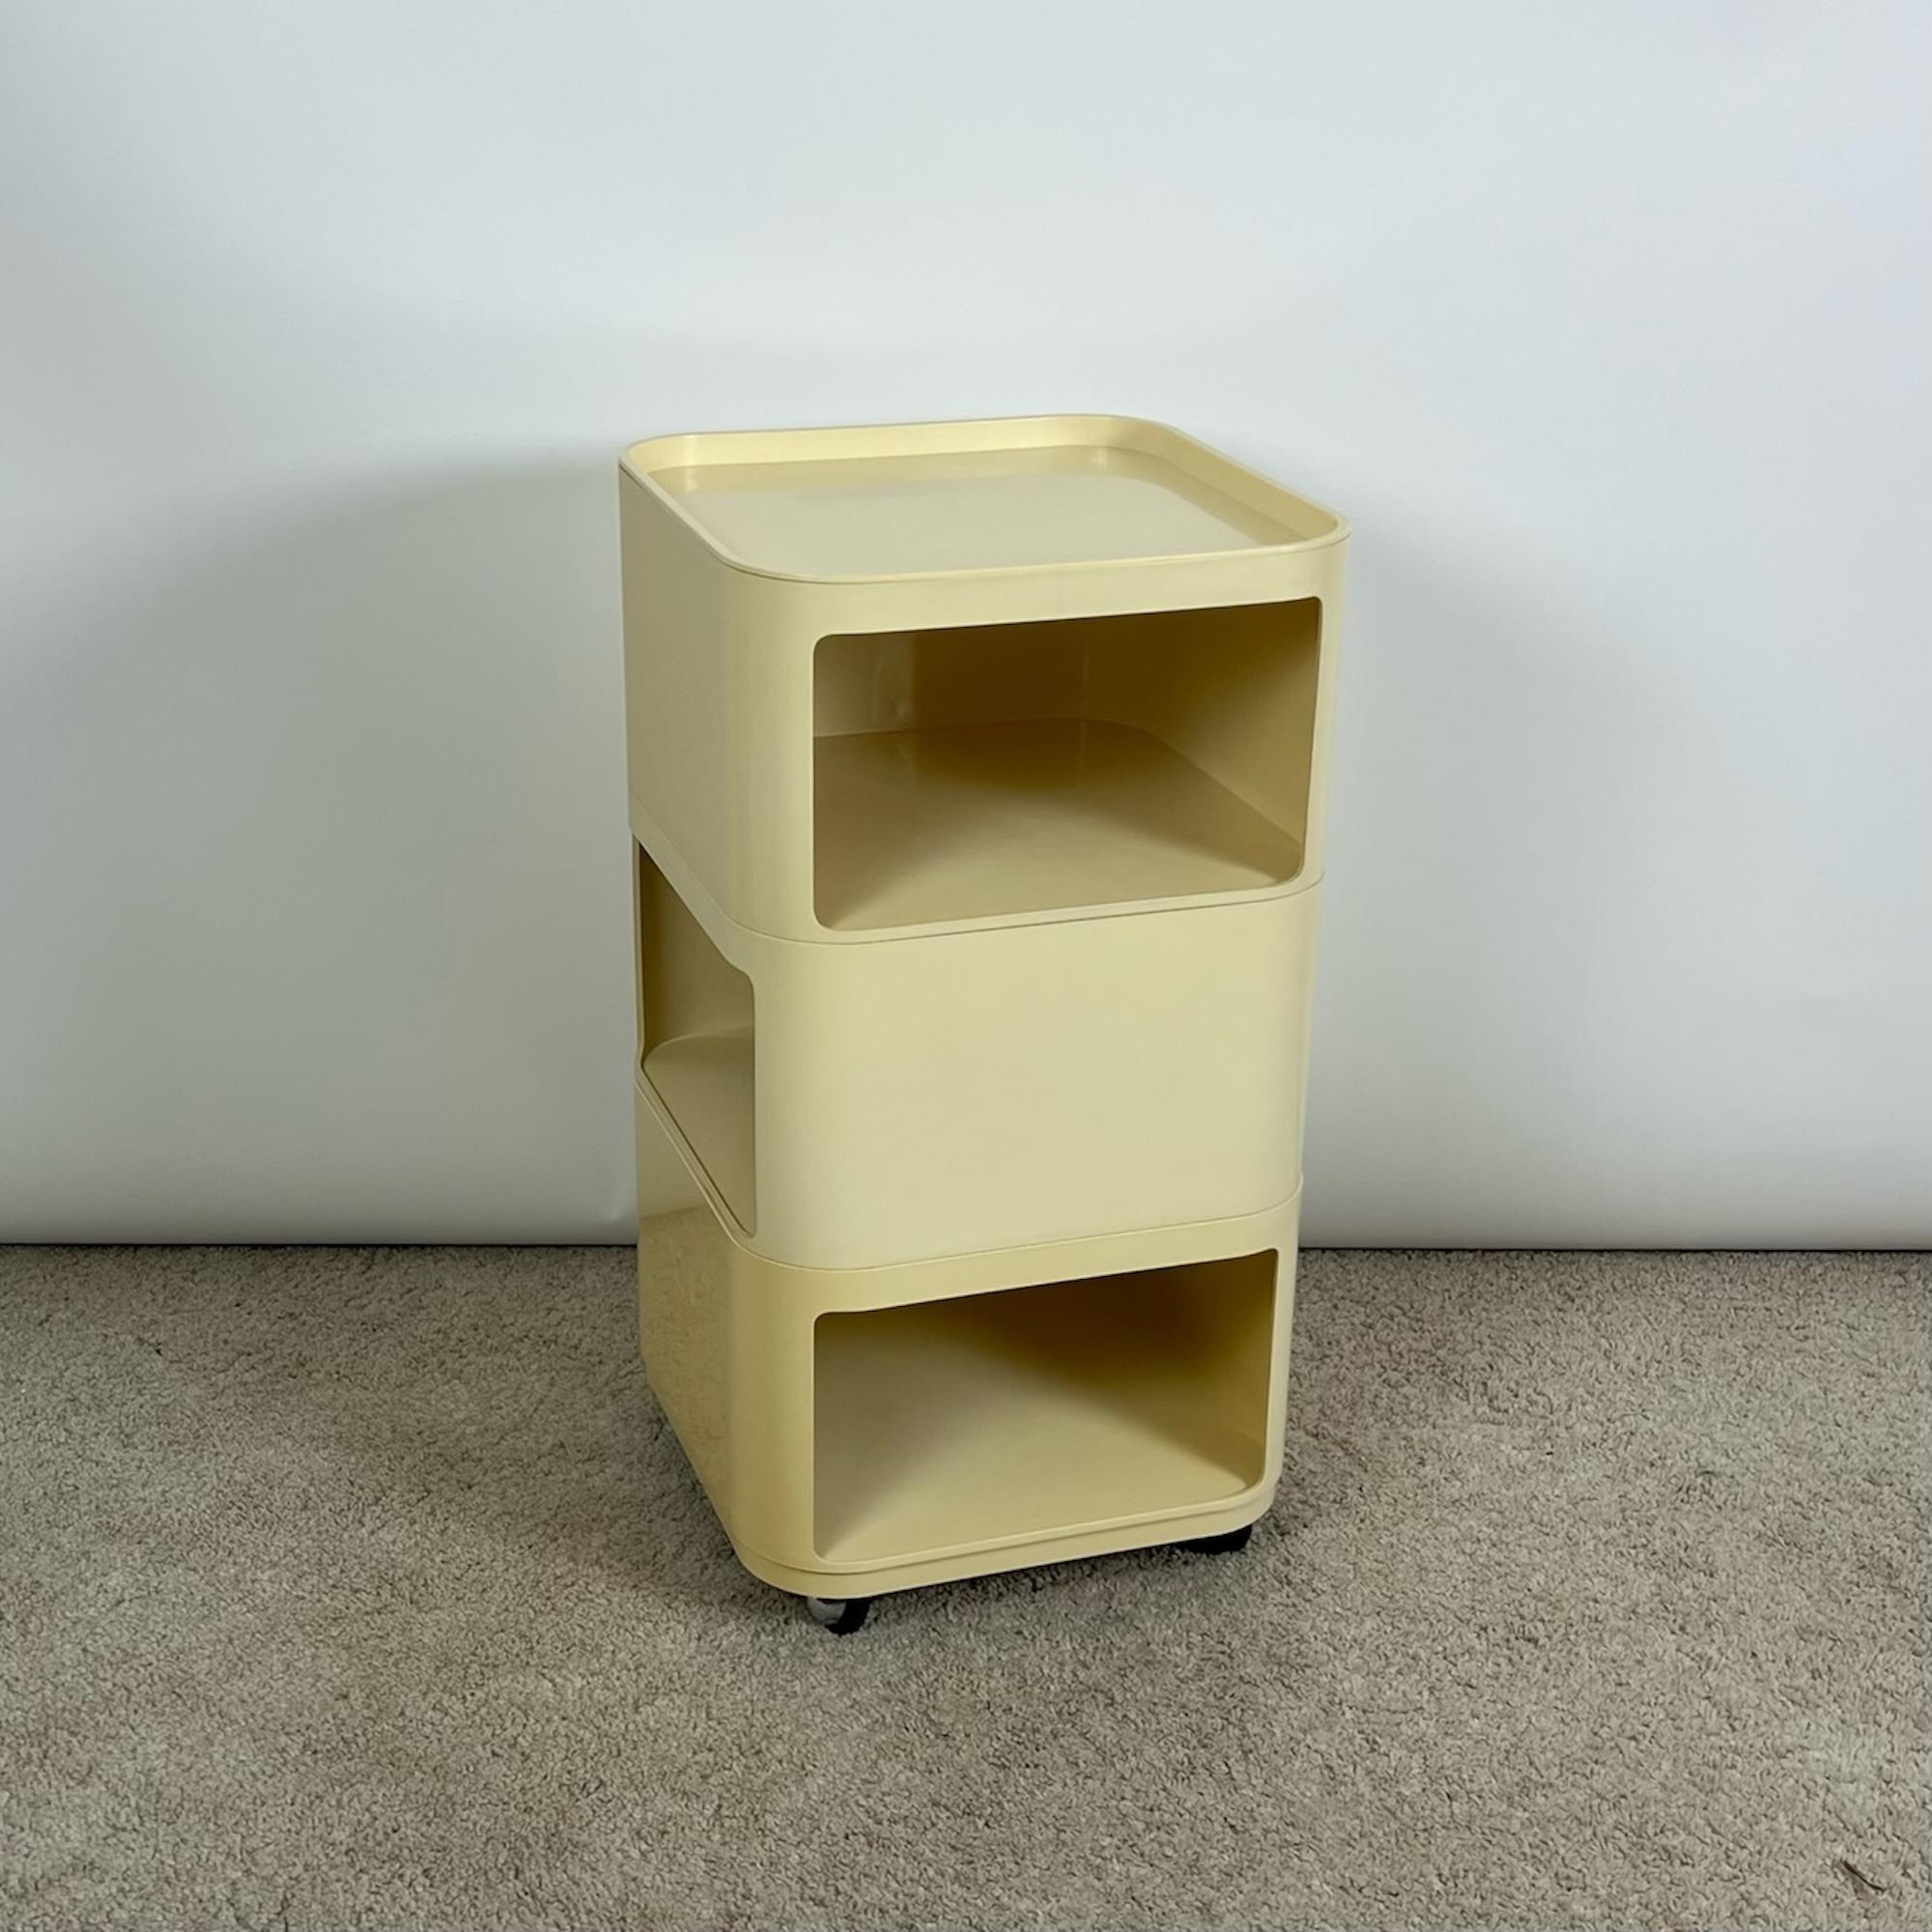 Beautiful square-based storage cabinet column on wheels designed by Anna Castelli Ferrieri and manufactured by Kartell in the 60s. 

This cabinet column is composed of three open boxes, one of which is on wheels.

The sleek design with the curved